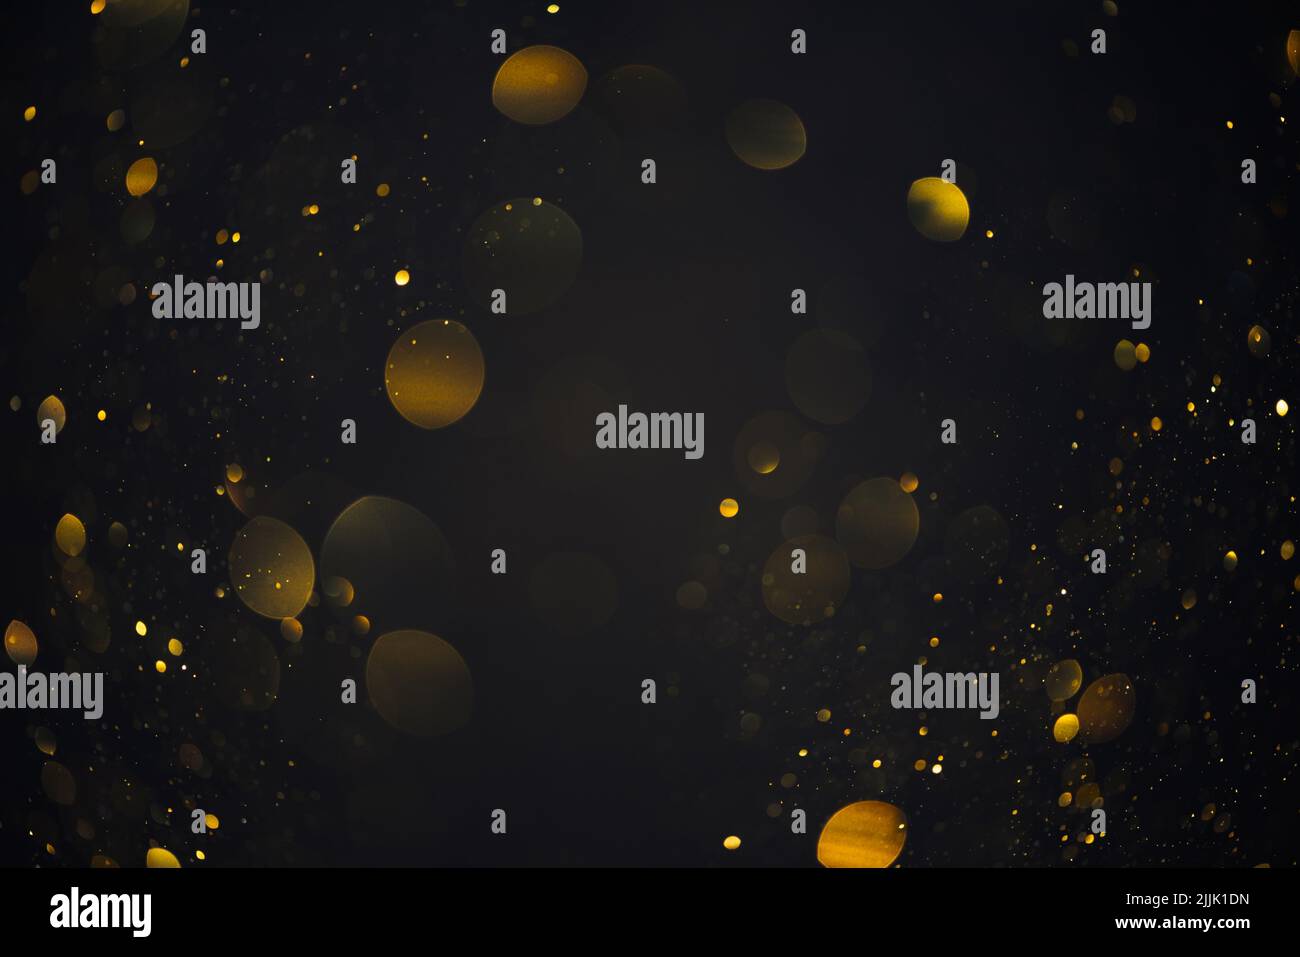 Gold glitter bokeh shiny dust particles lights abstract dark background Stock Photo